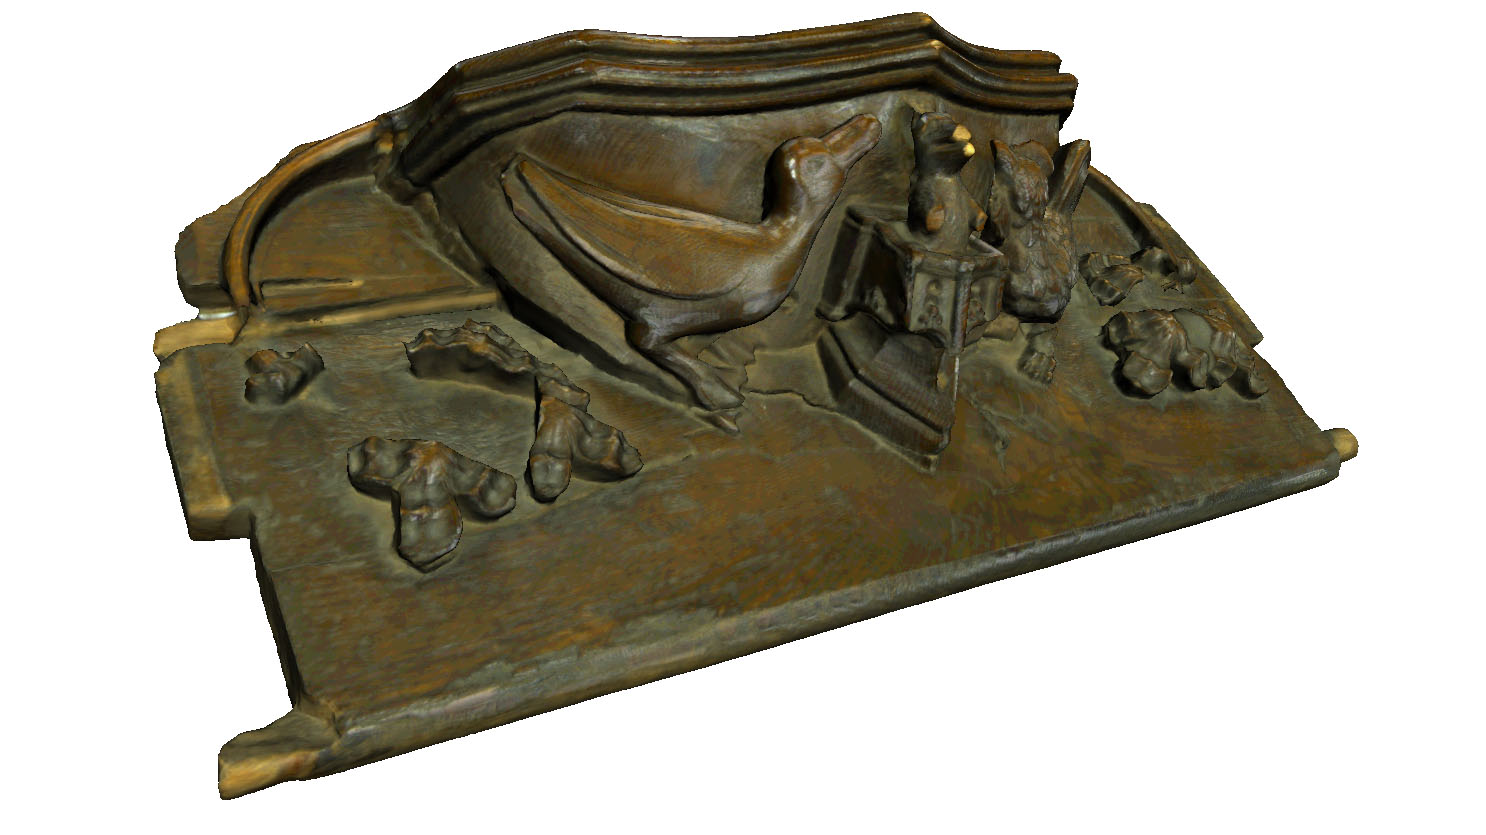 3D Scan of seat detail from Ripon Cathedral